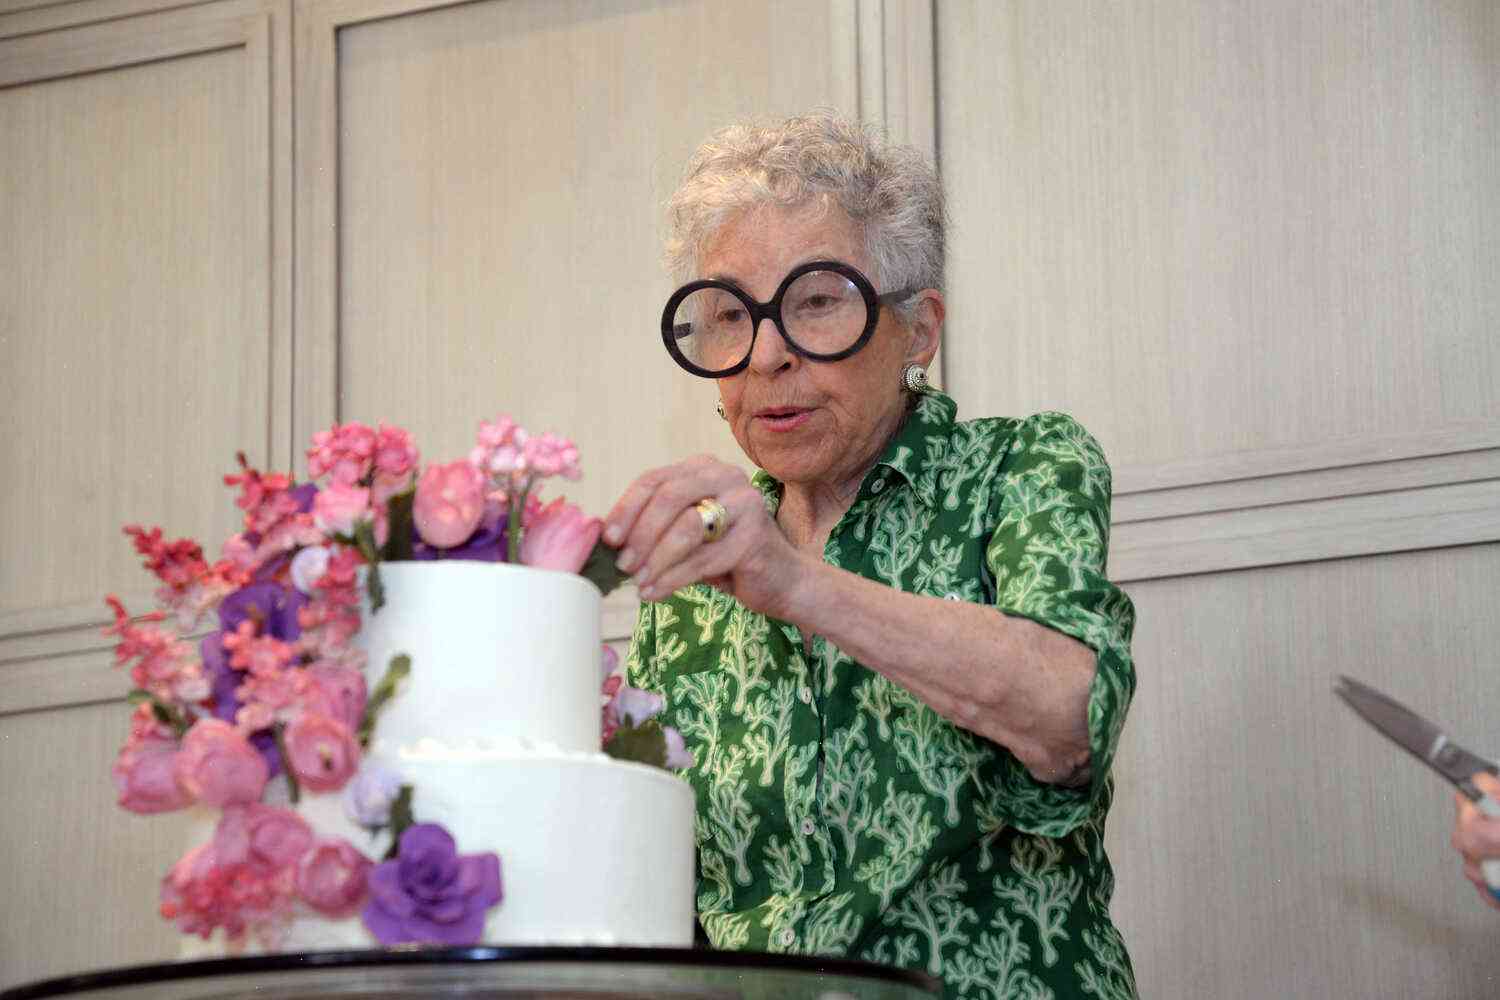 The creator of Sylvia’s cakes has died at 91